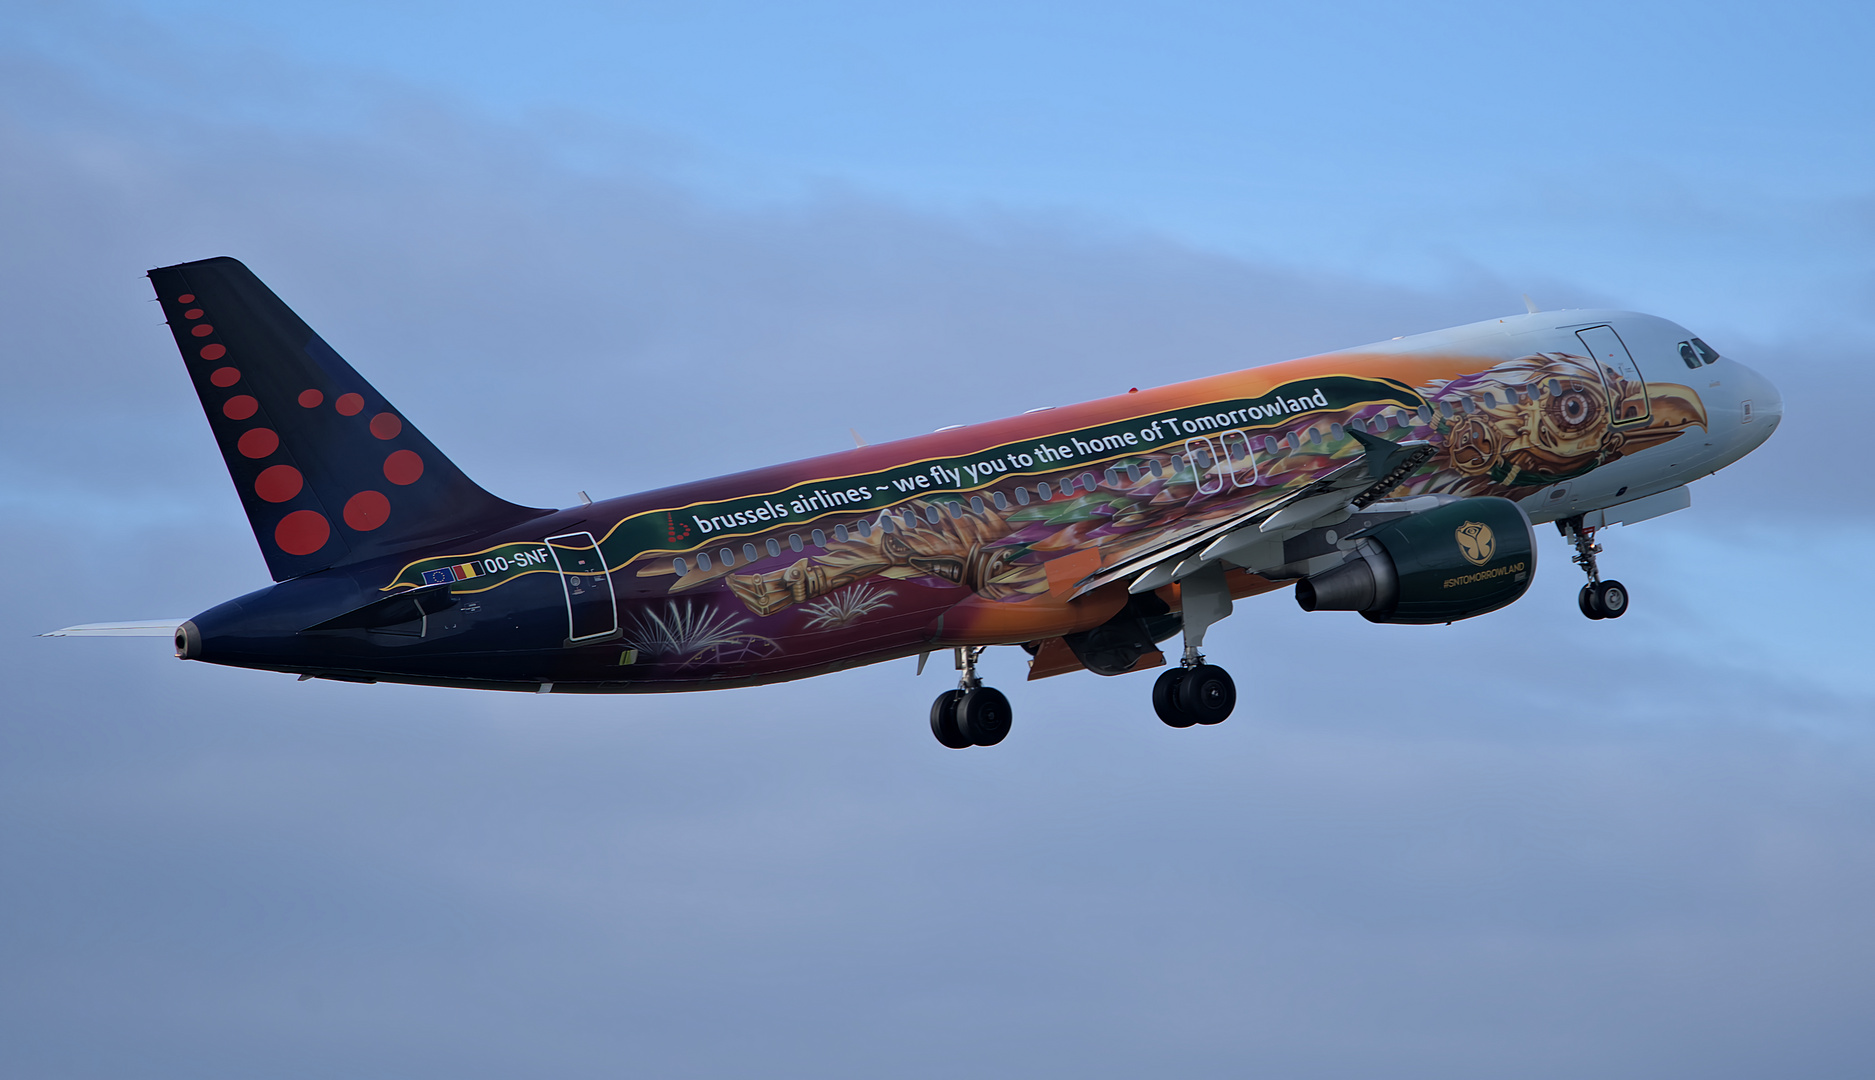   Brussels Airlines   Airbus A320-214